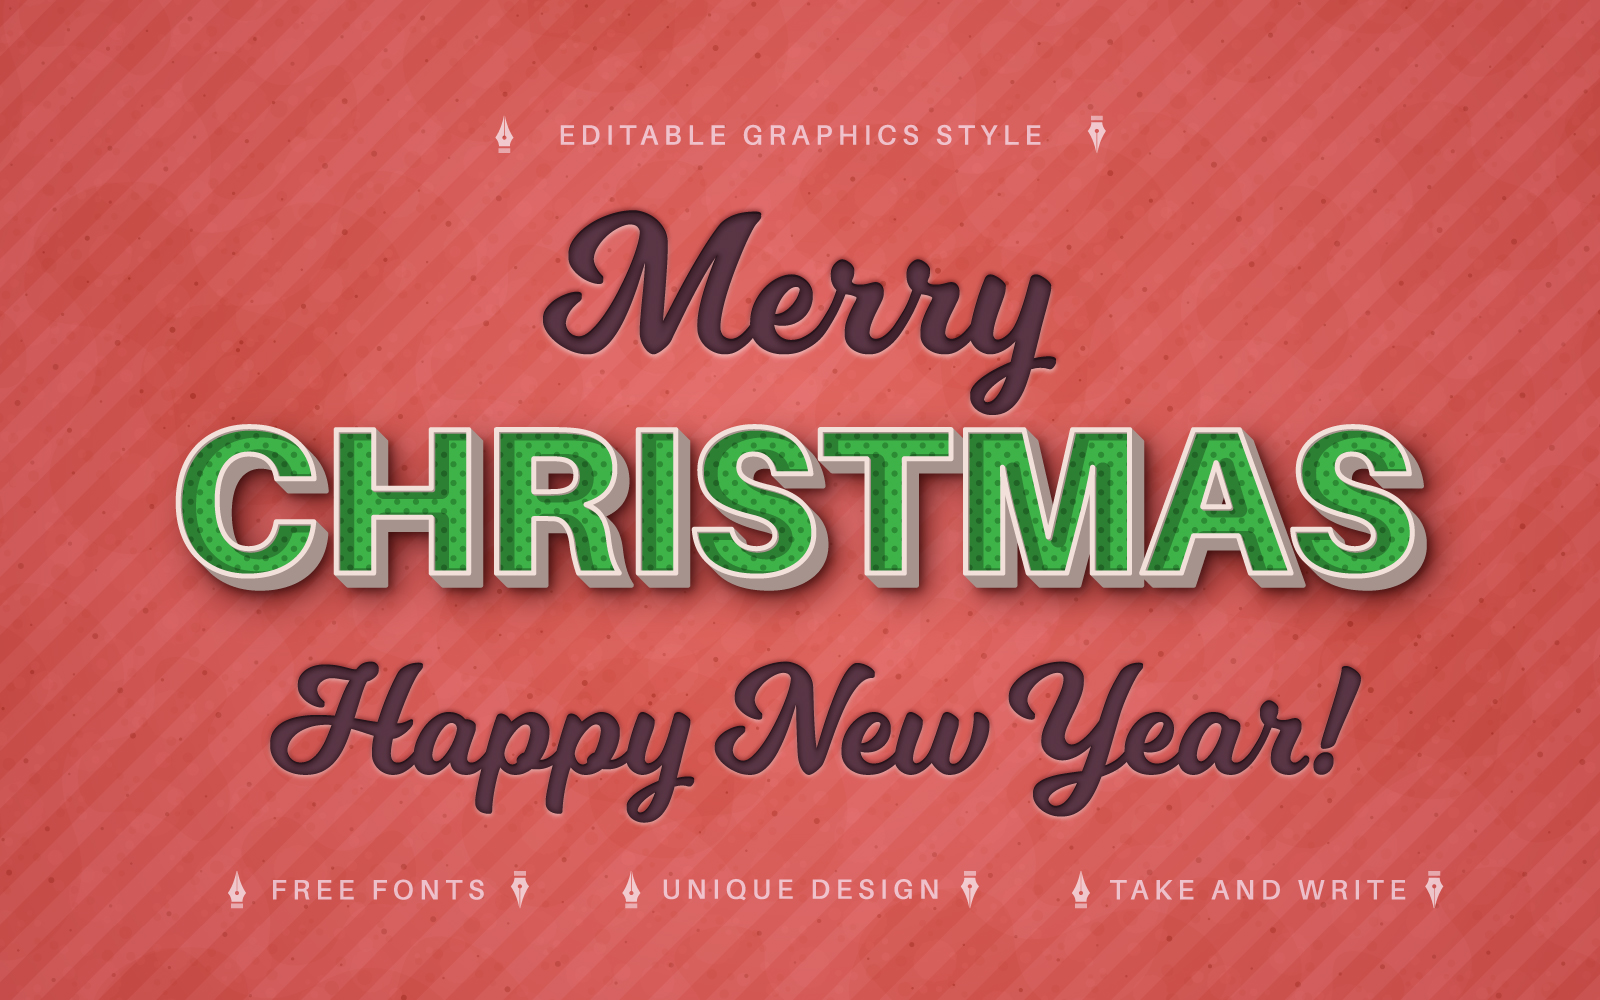 Merry Christmas Retro - Editable Text Effect, Font Style, Graphics Illustration